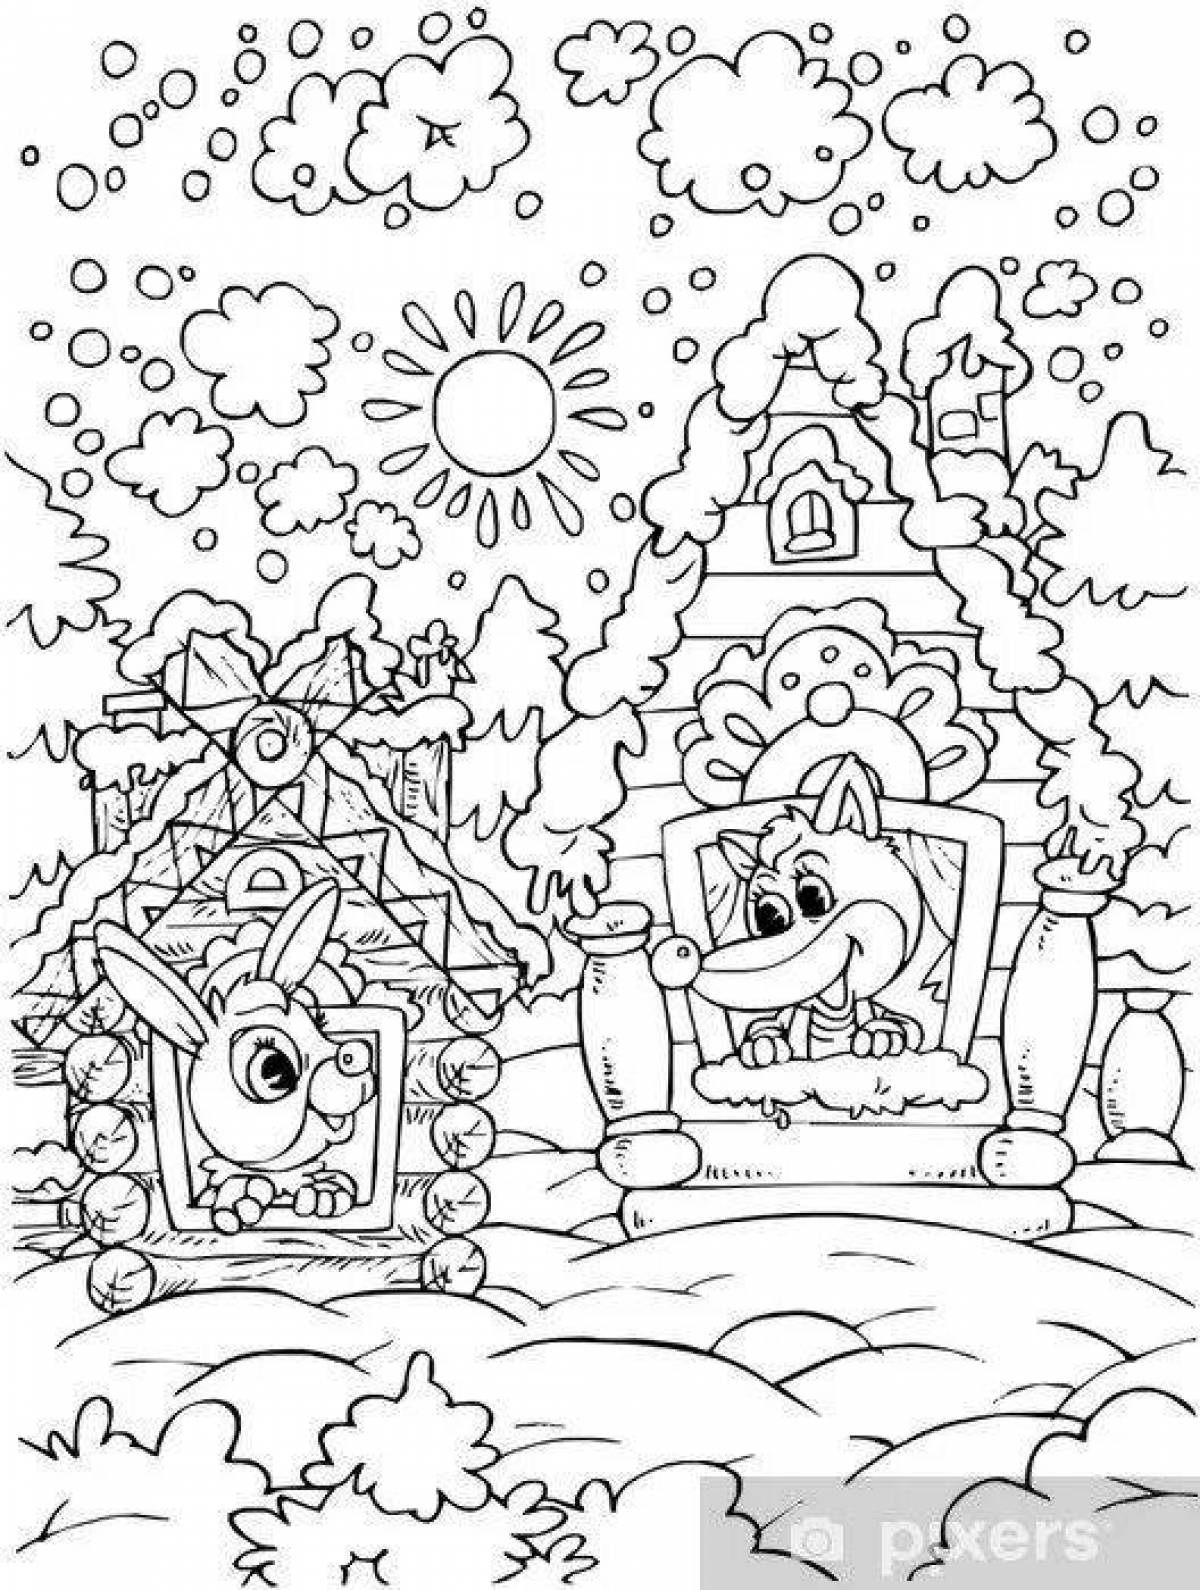 Bast and ice hut coloring page